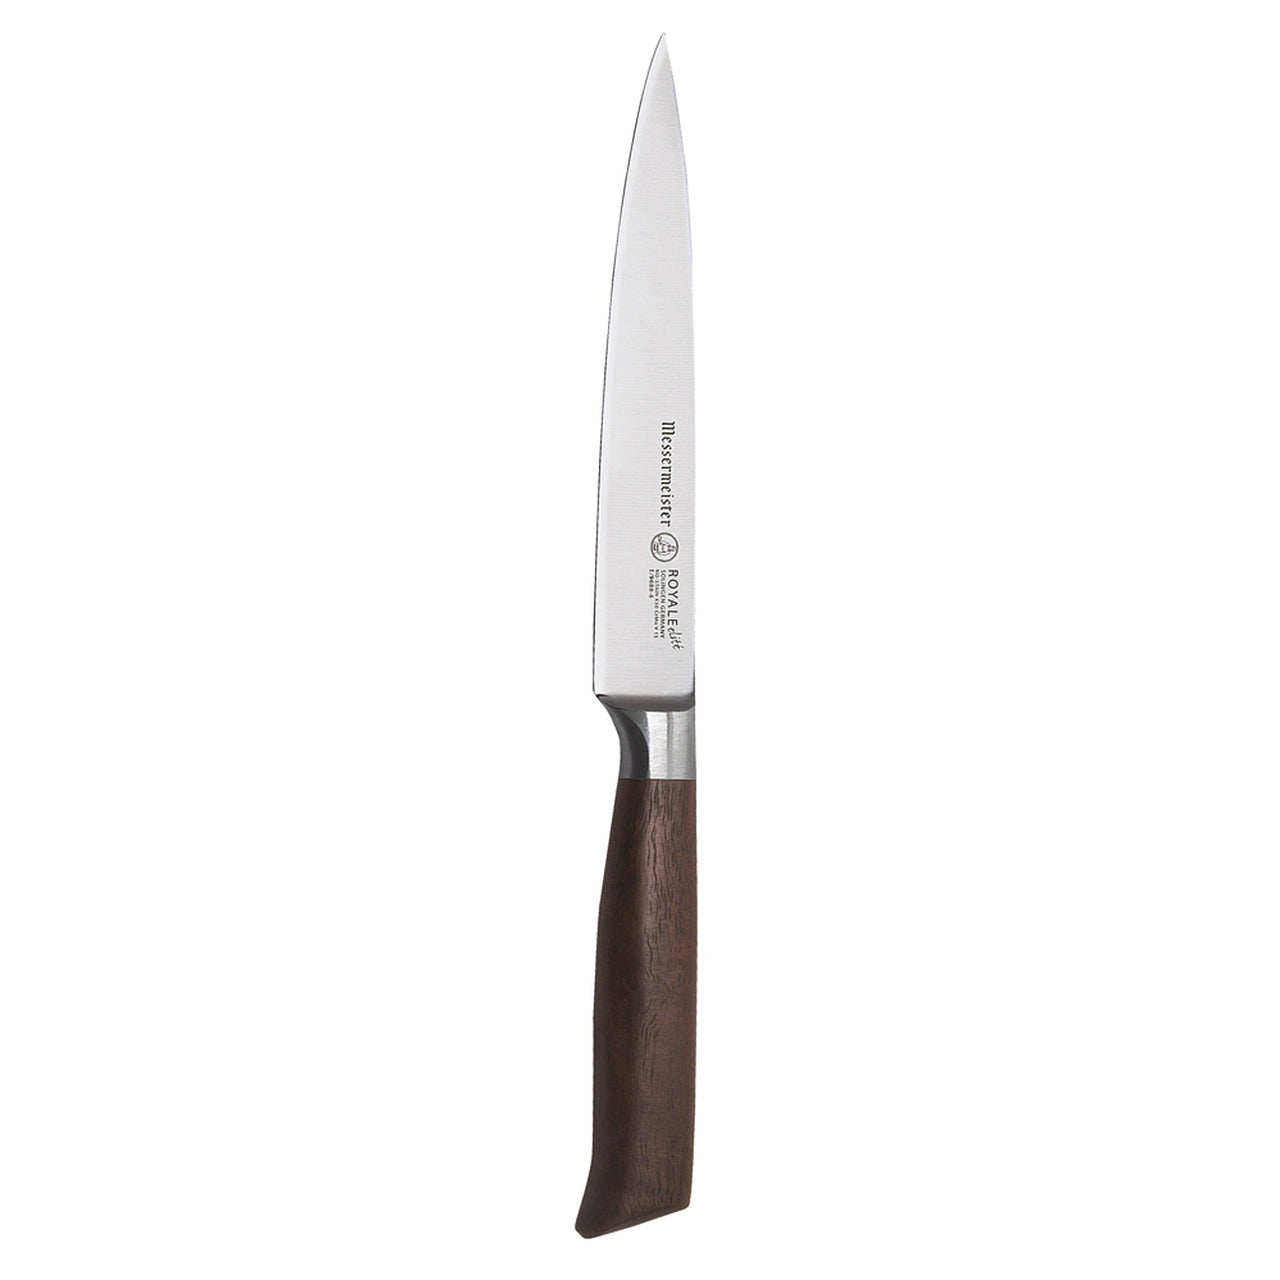 BEON.COM.AU E9688 6         Royal Elite Utility Knife 6 Inch You will find yourself using the Messermeister Royale Elité 6” Utility Knife for all of your go-to tasks in the kitchen. With a fine edge, this traditional style utility knife is one of the most frequently used knives in the kitchen. A favorite for... Messermeister at BEON.COM.AU